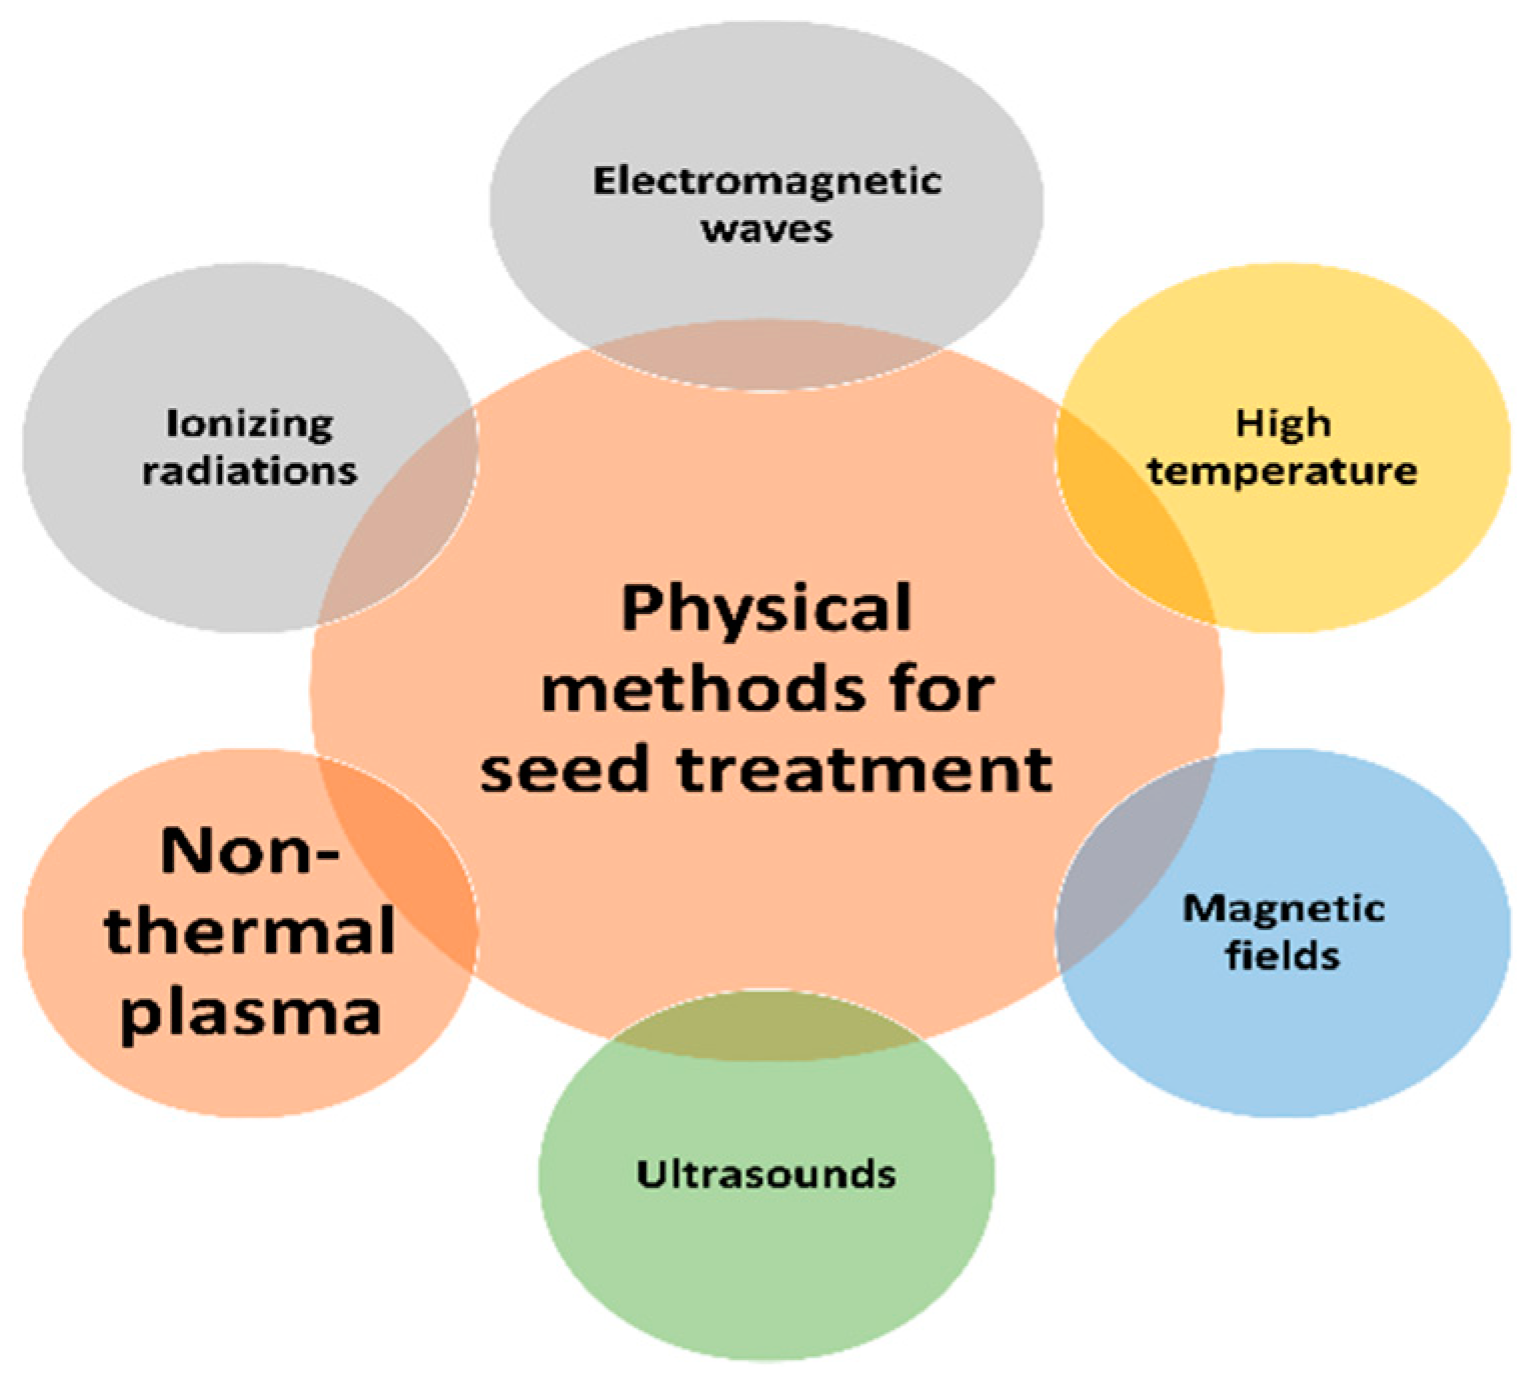 Processes Free Full Text Plasma Agriculture From Laboratory To Farm A Review Html